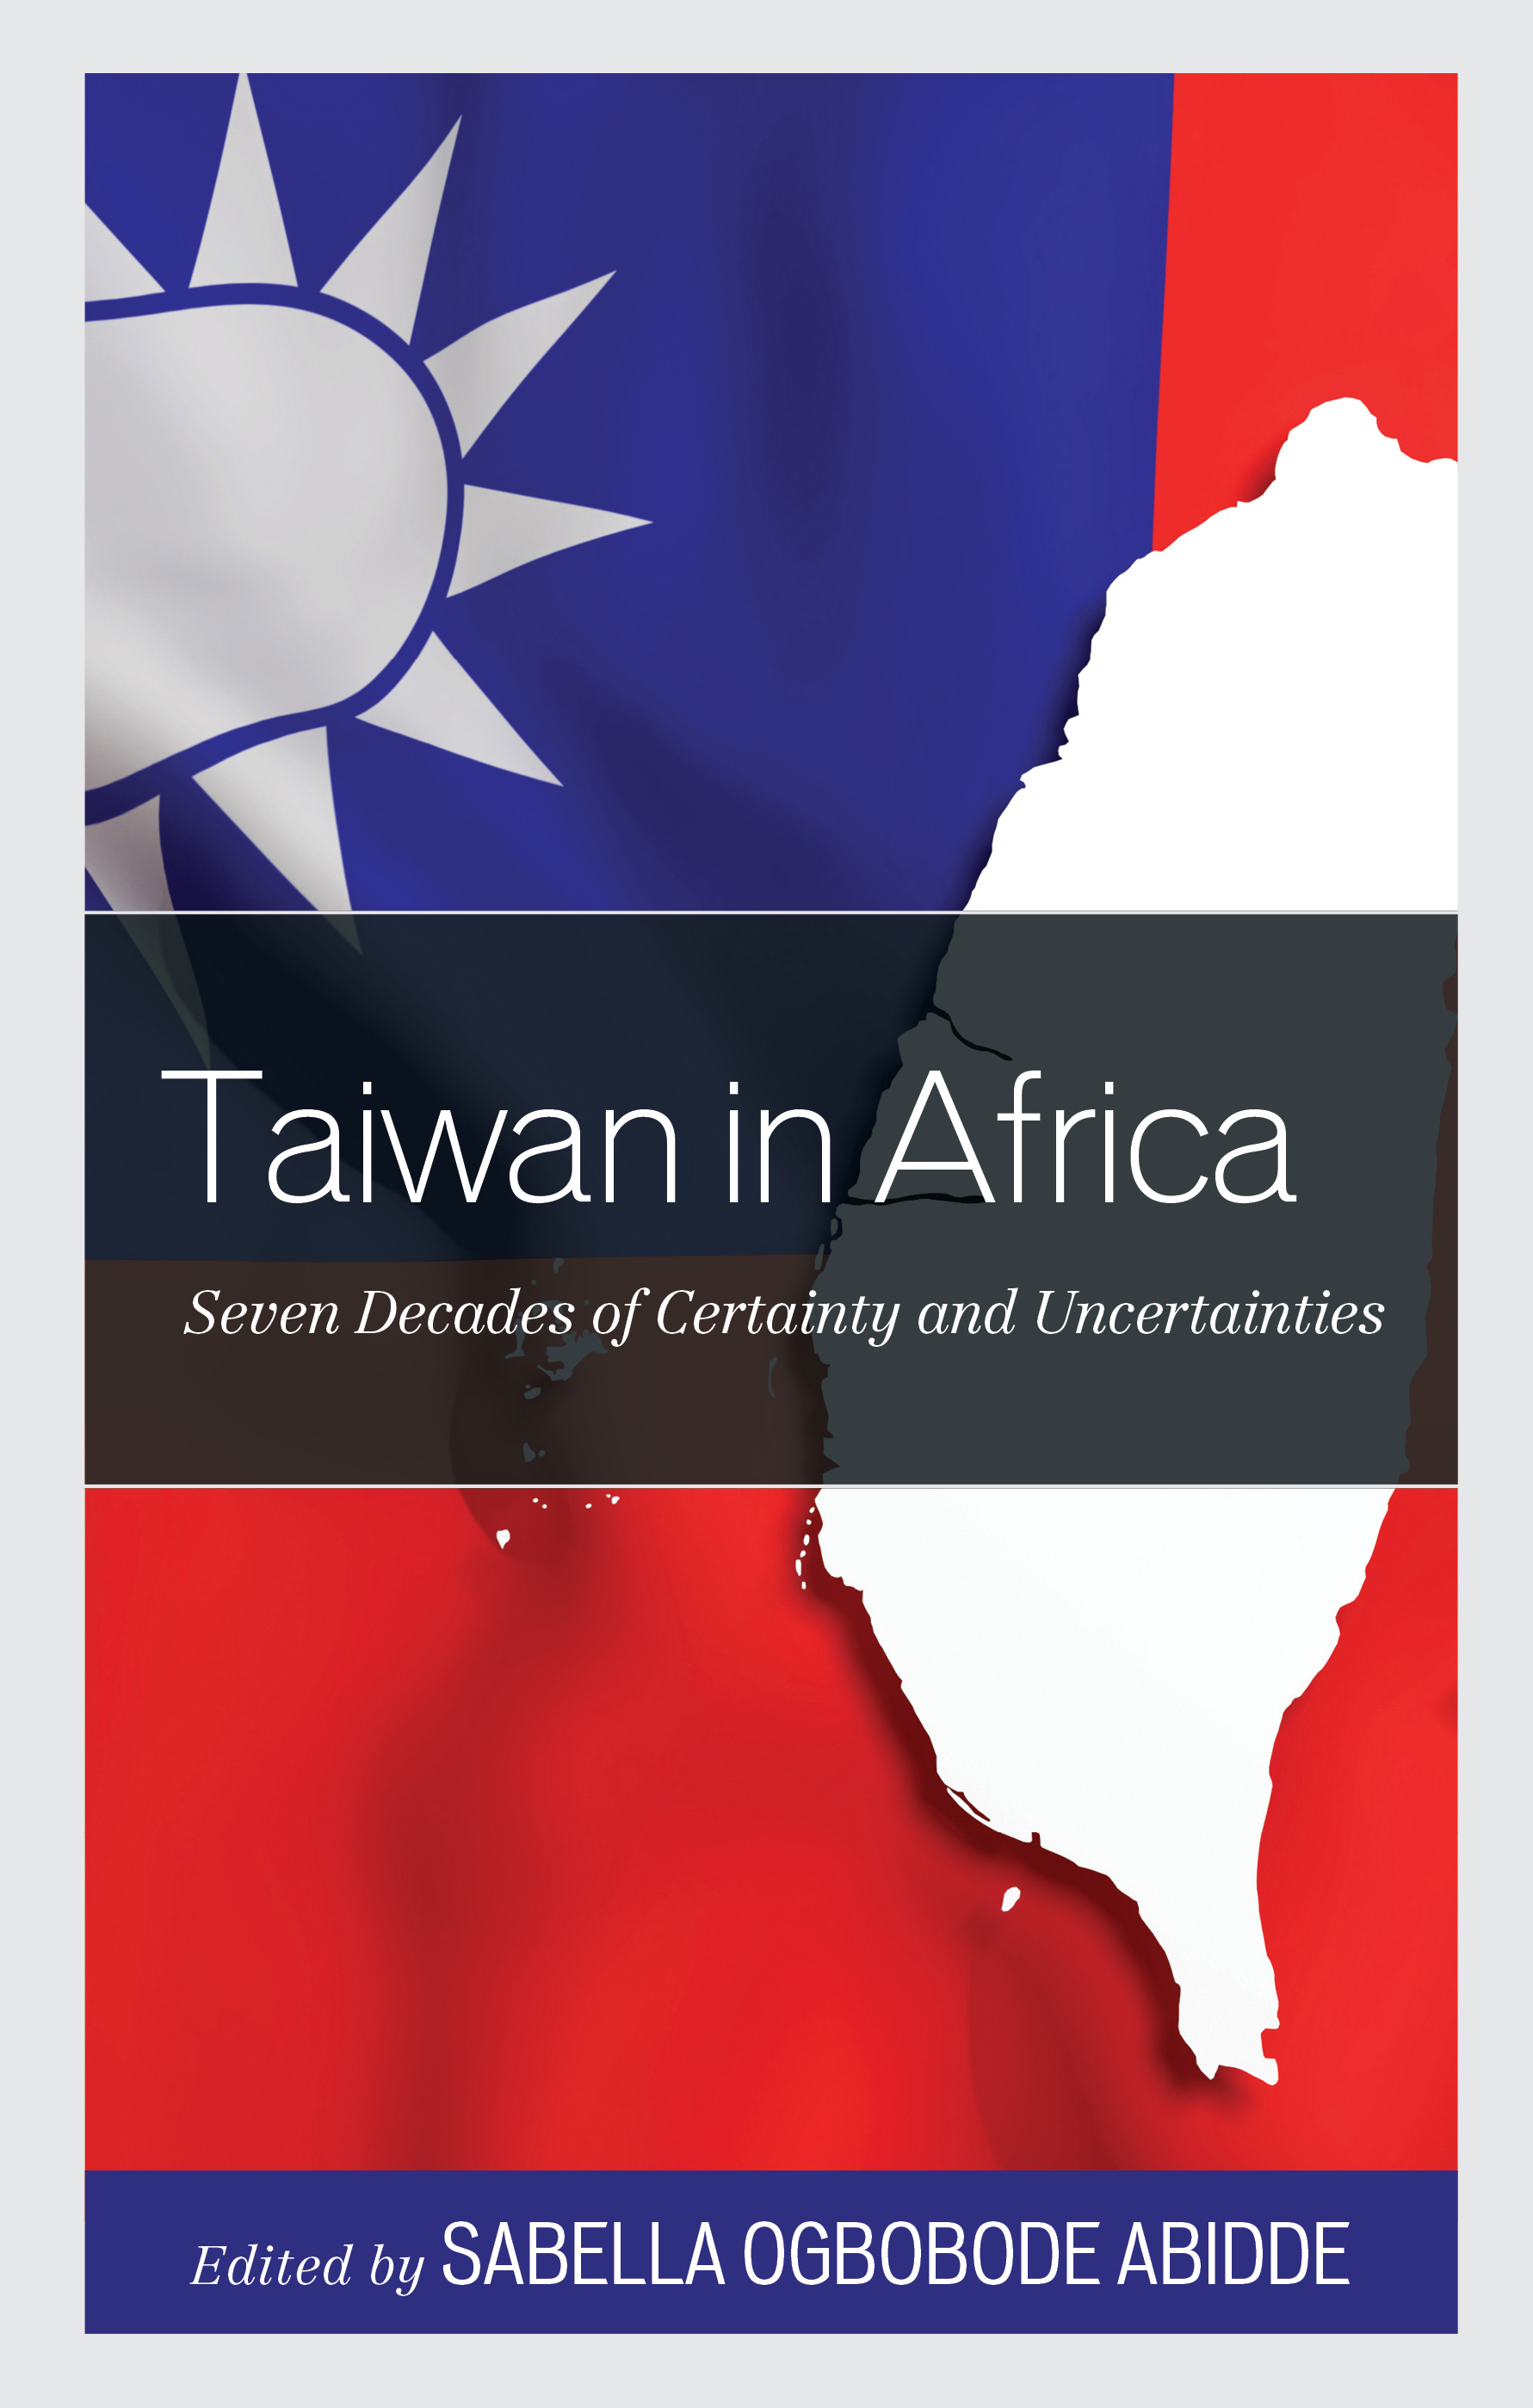 Taiwan in Africa: Seven Decades of Certainty and Uncertainties